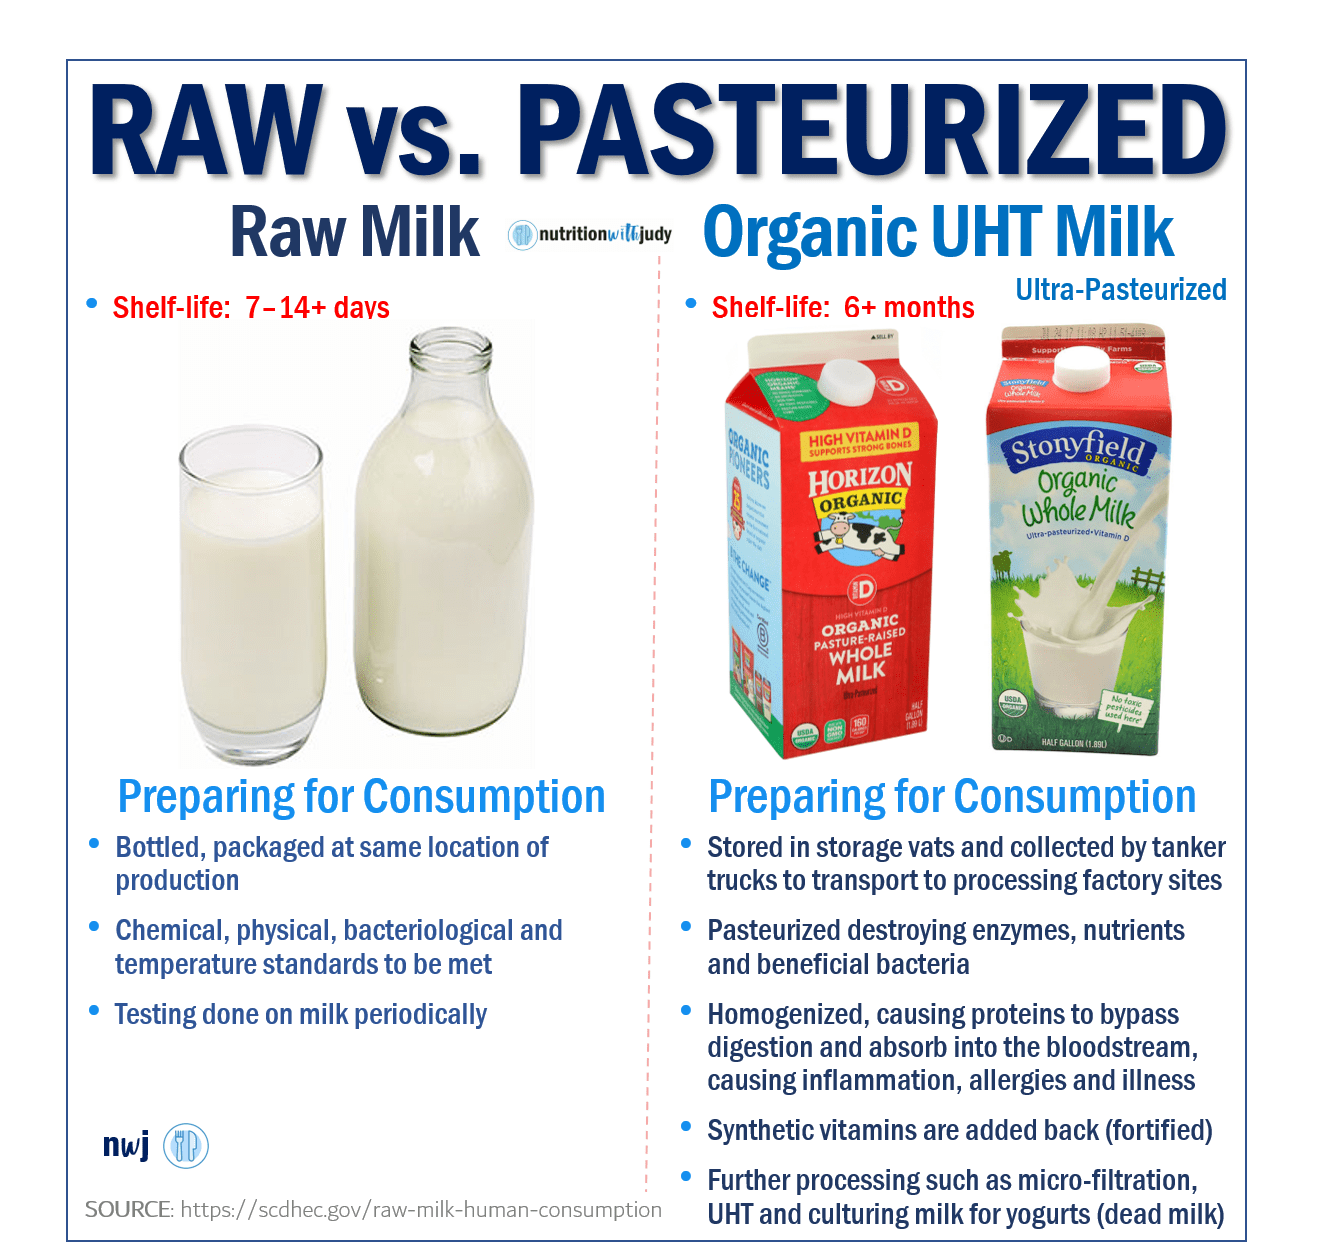 Oped: Raw milk is dangerous and needs regulation